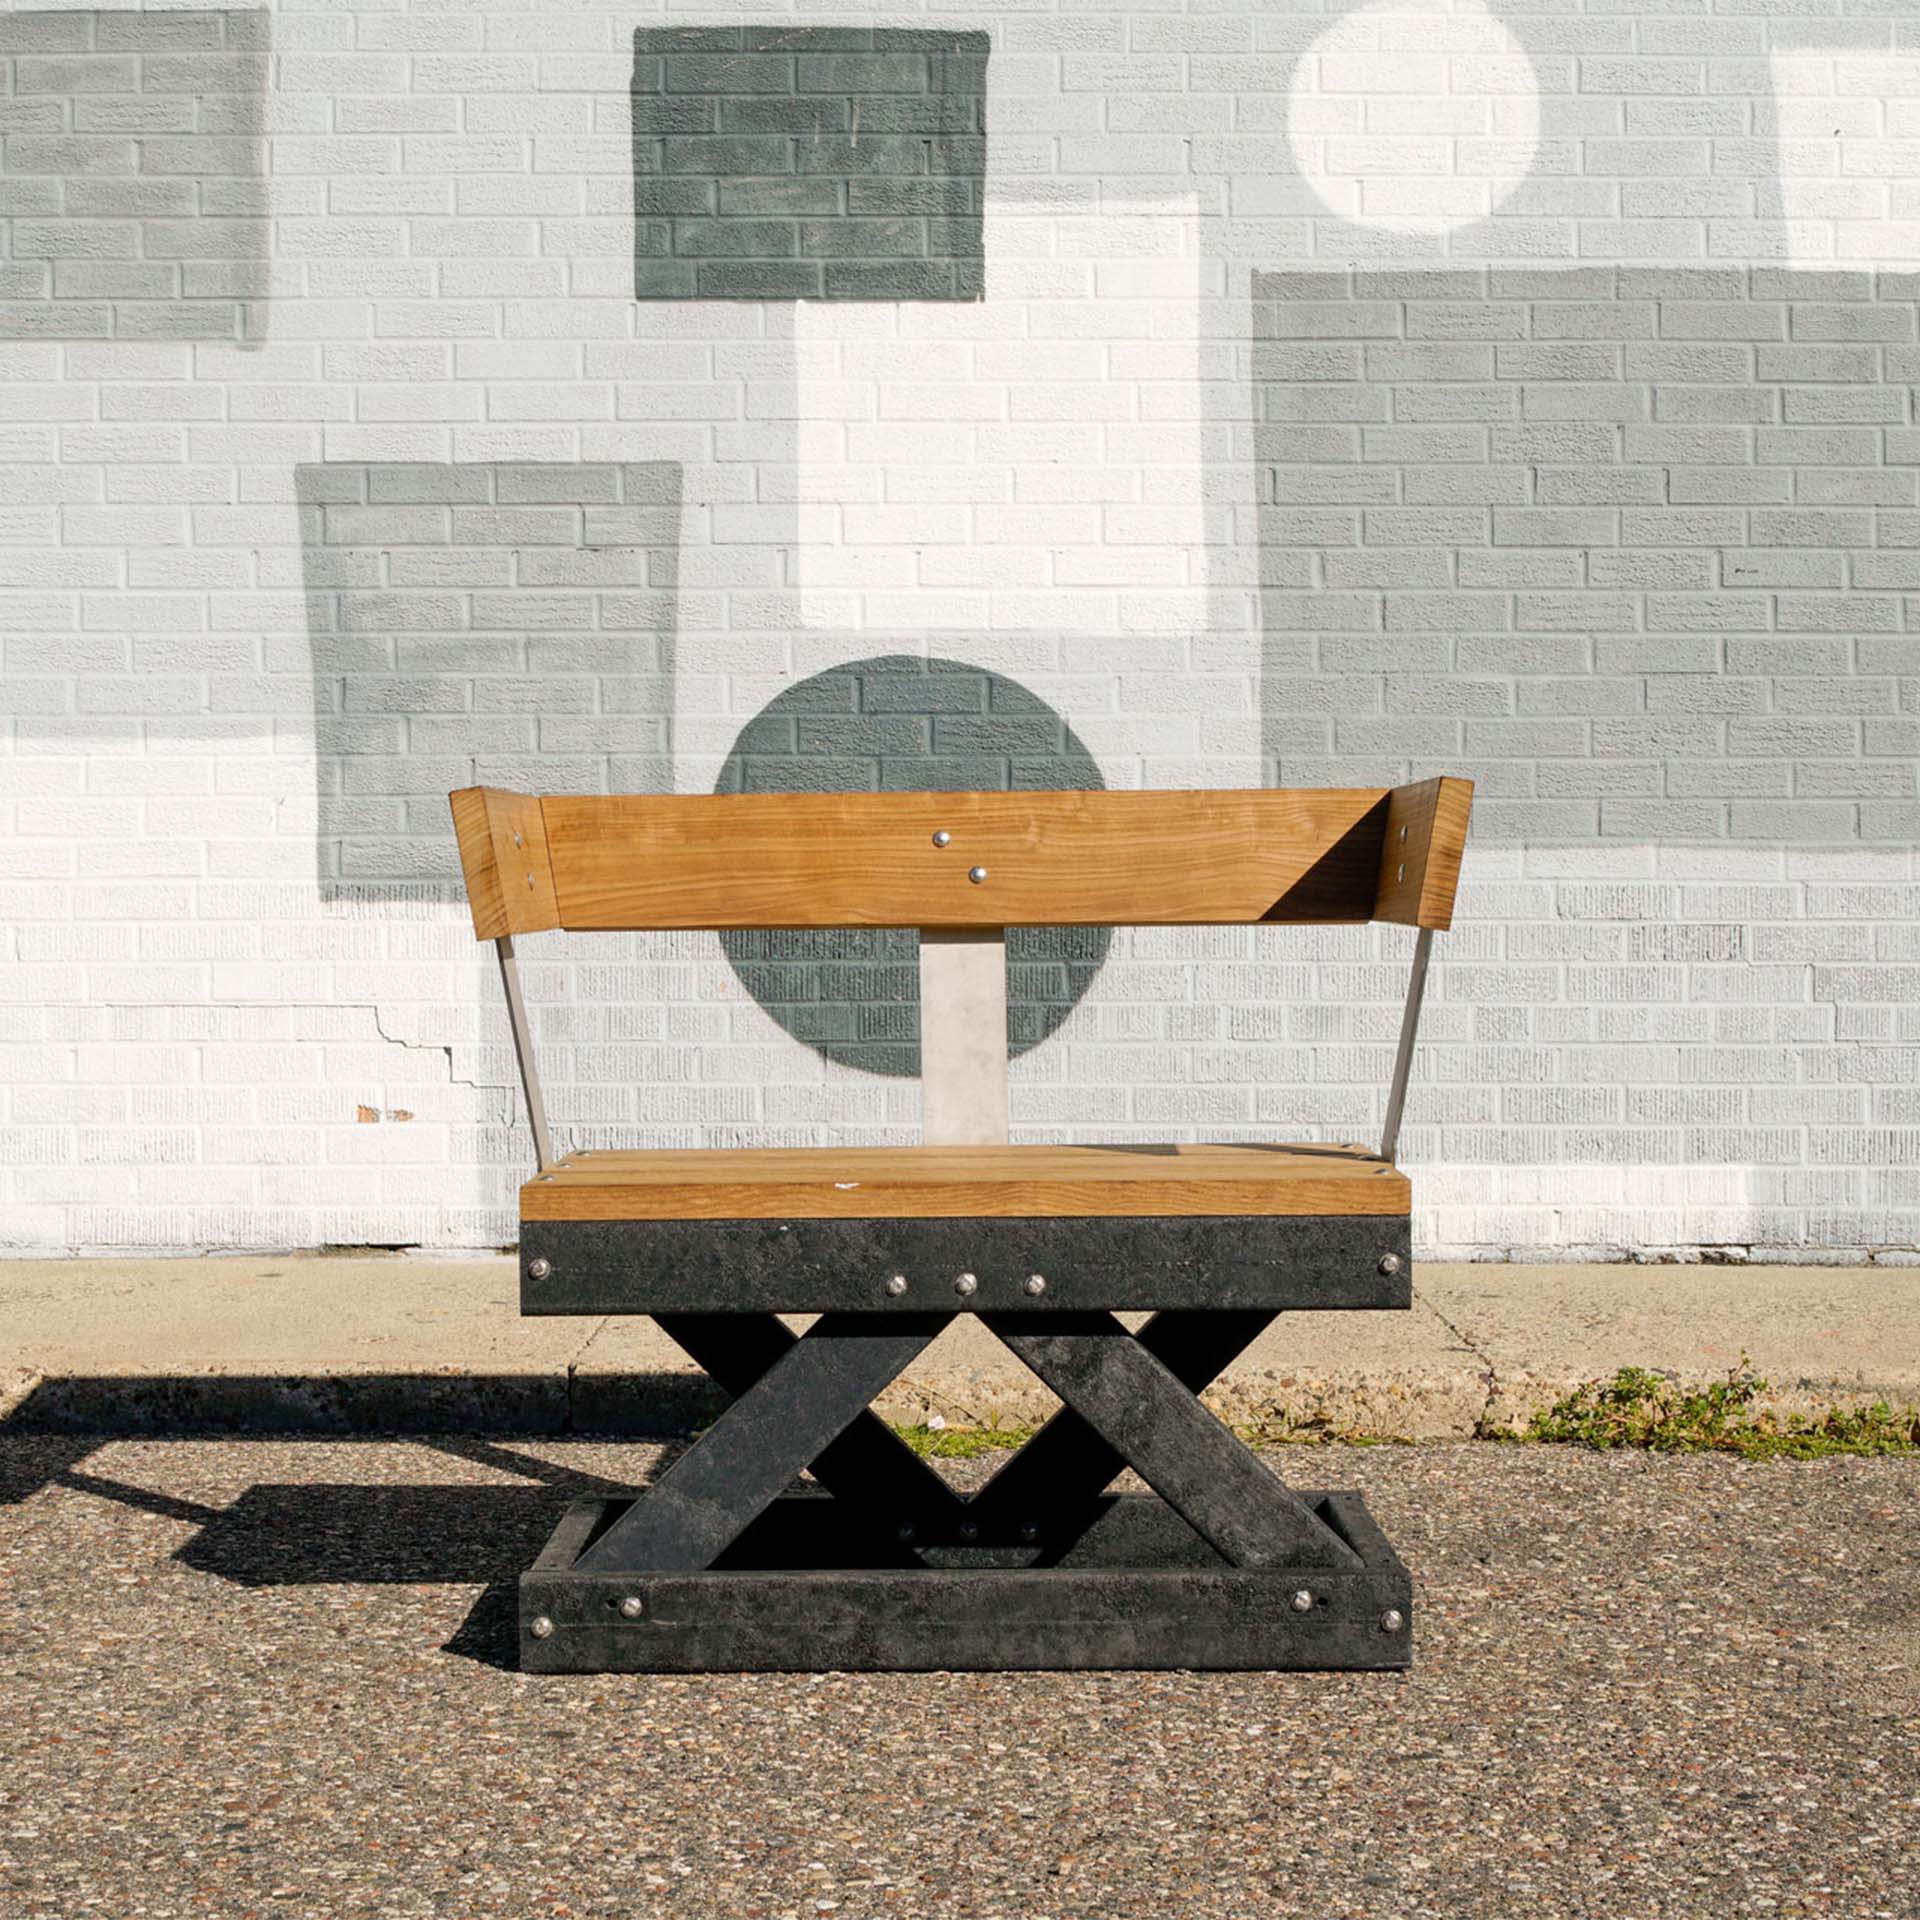 Wooden and metal bench